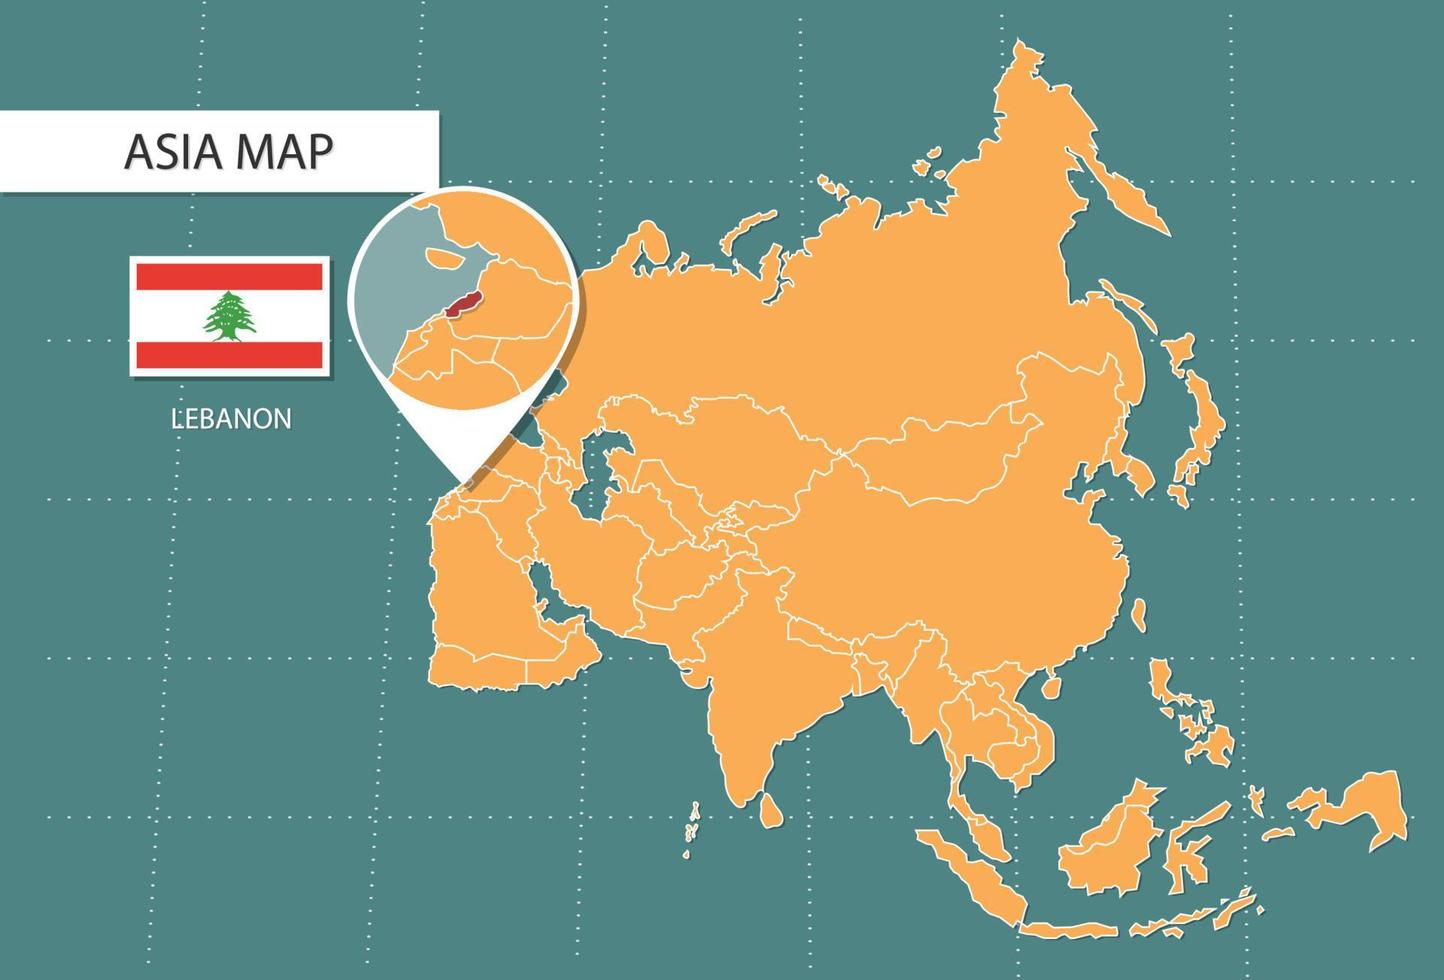 Lebanon map in Asia zoom version, icons showing Lebanon location and flags. vector